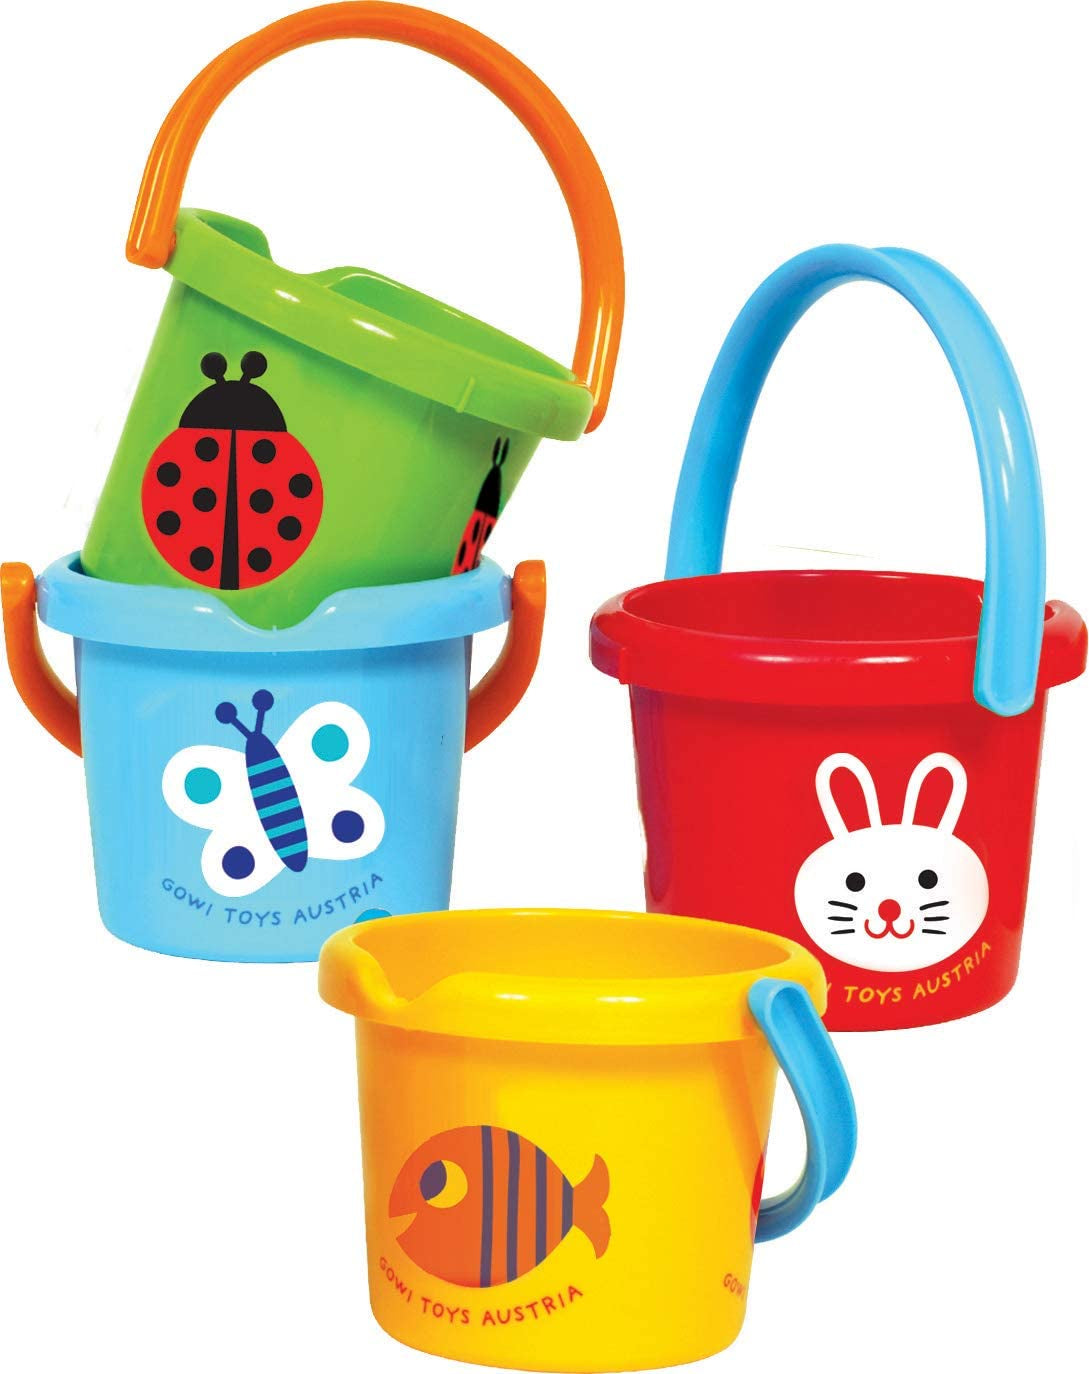 GOWI TOYS -  Bucket, 14cm - Assorted Designs